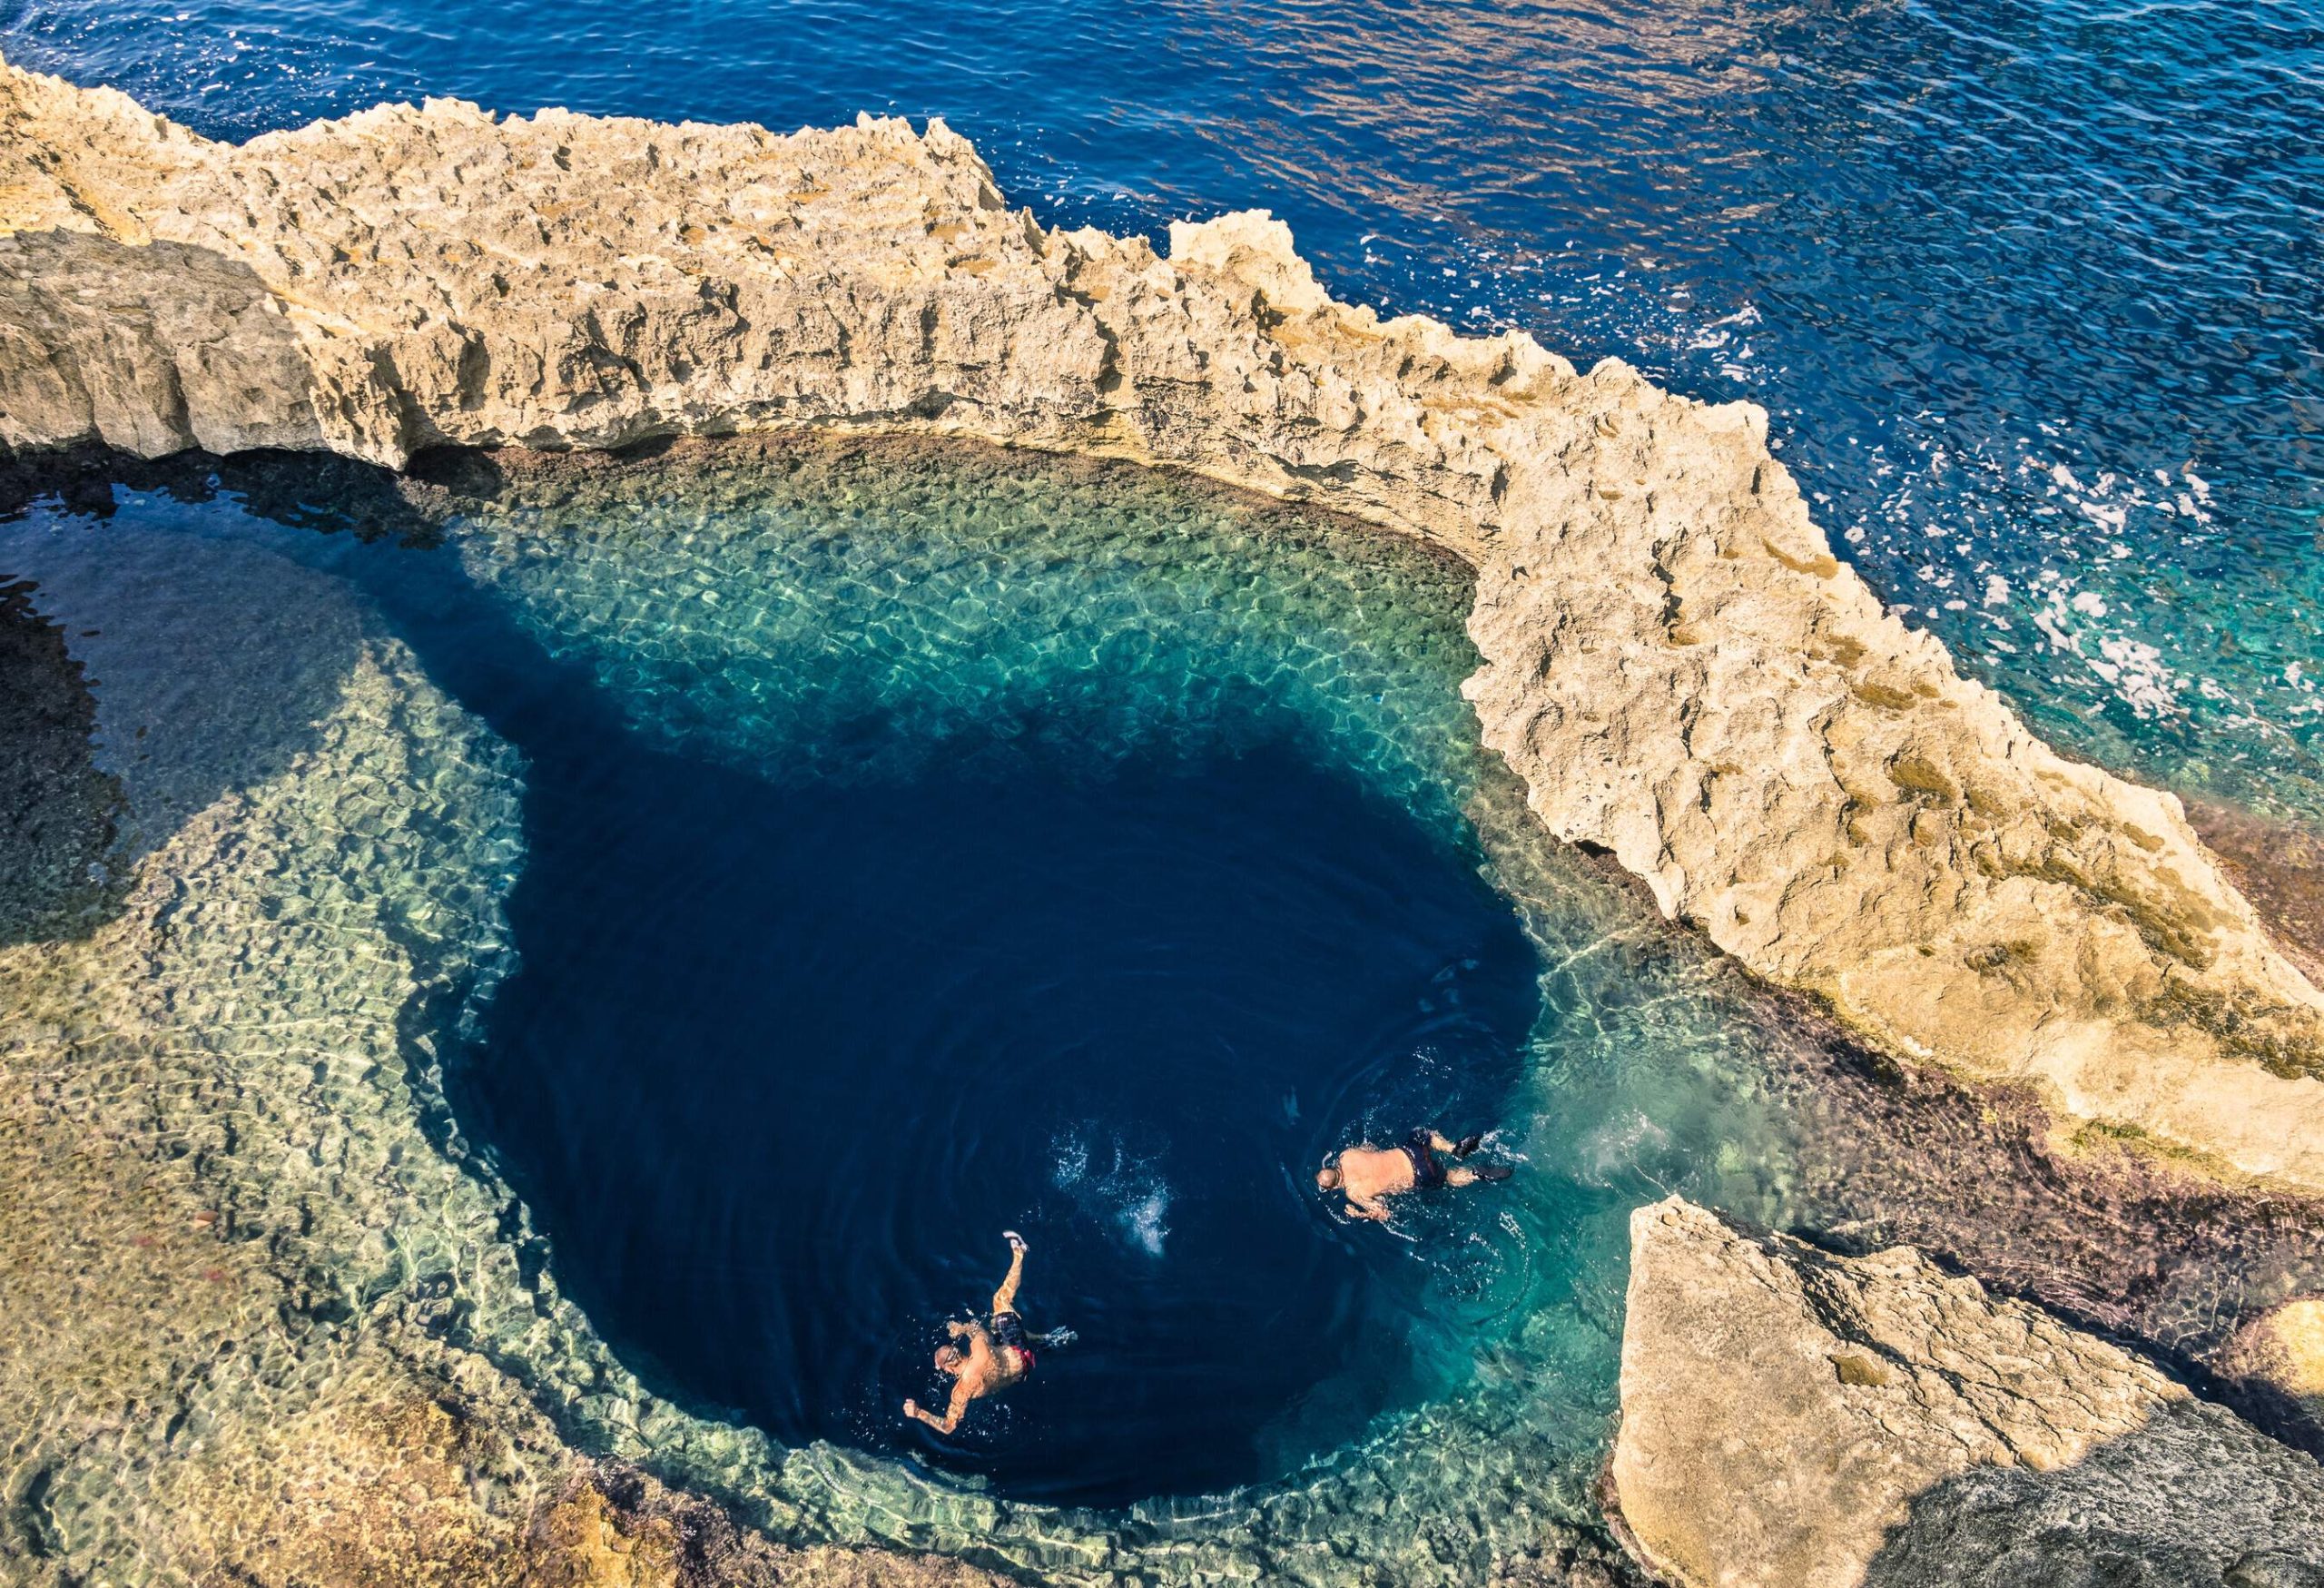 Two people are swimming in a large, deep blue hole next to the sea, which is encircled by a sedimentary rock formation.